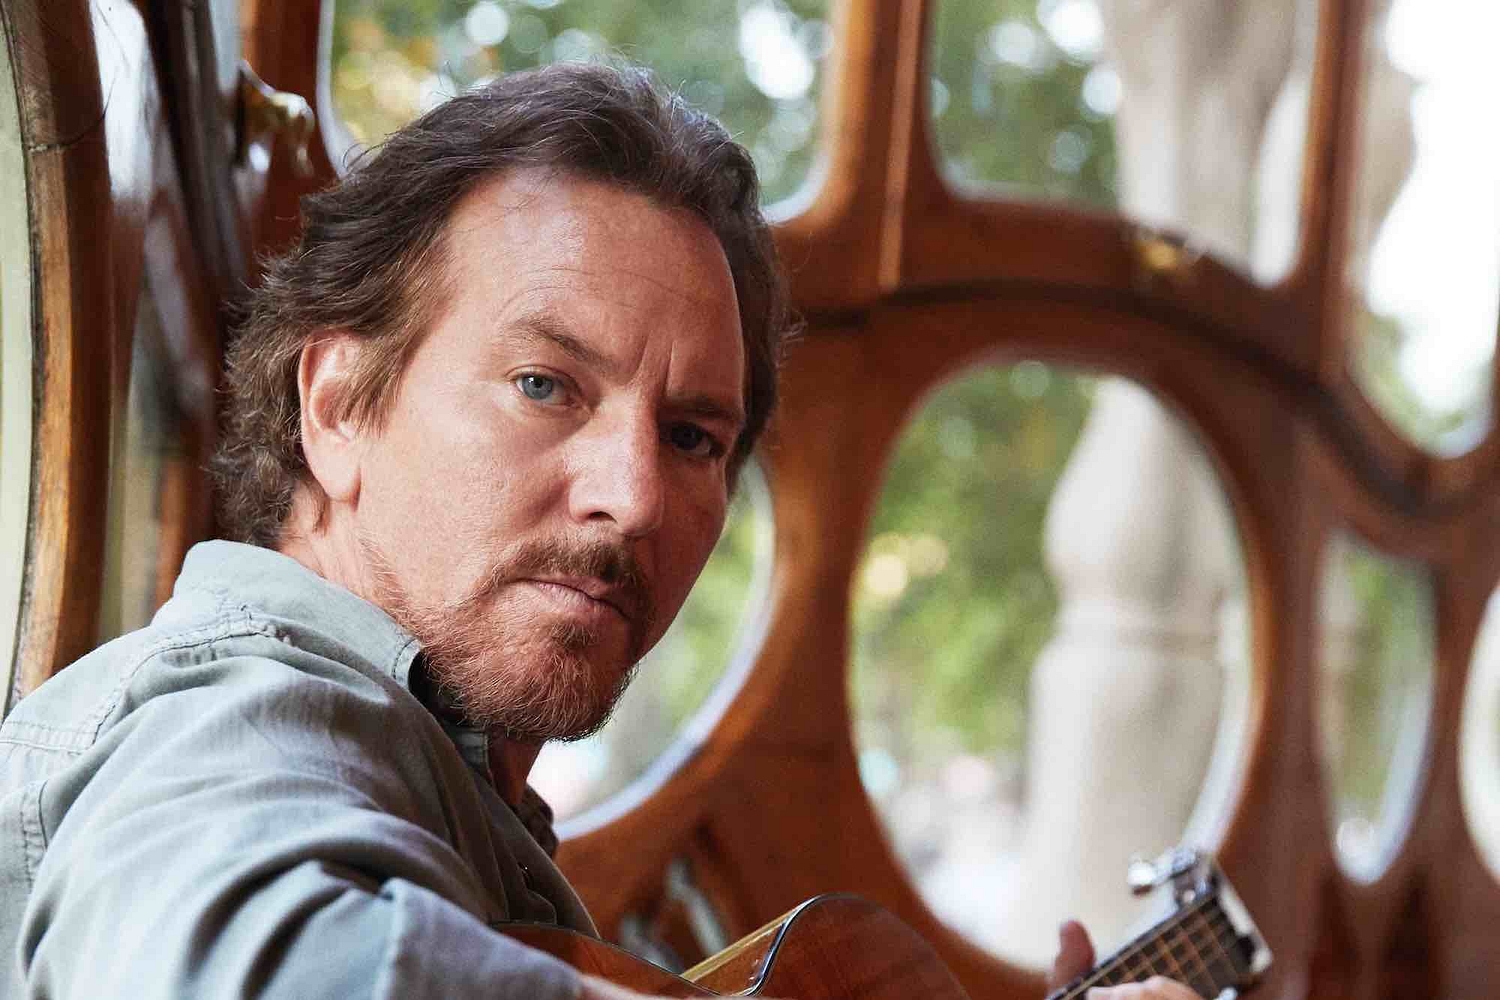 Eddie Vedder announces new solo album ‘Earthling’ with single ‘Long Way’